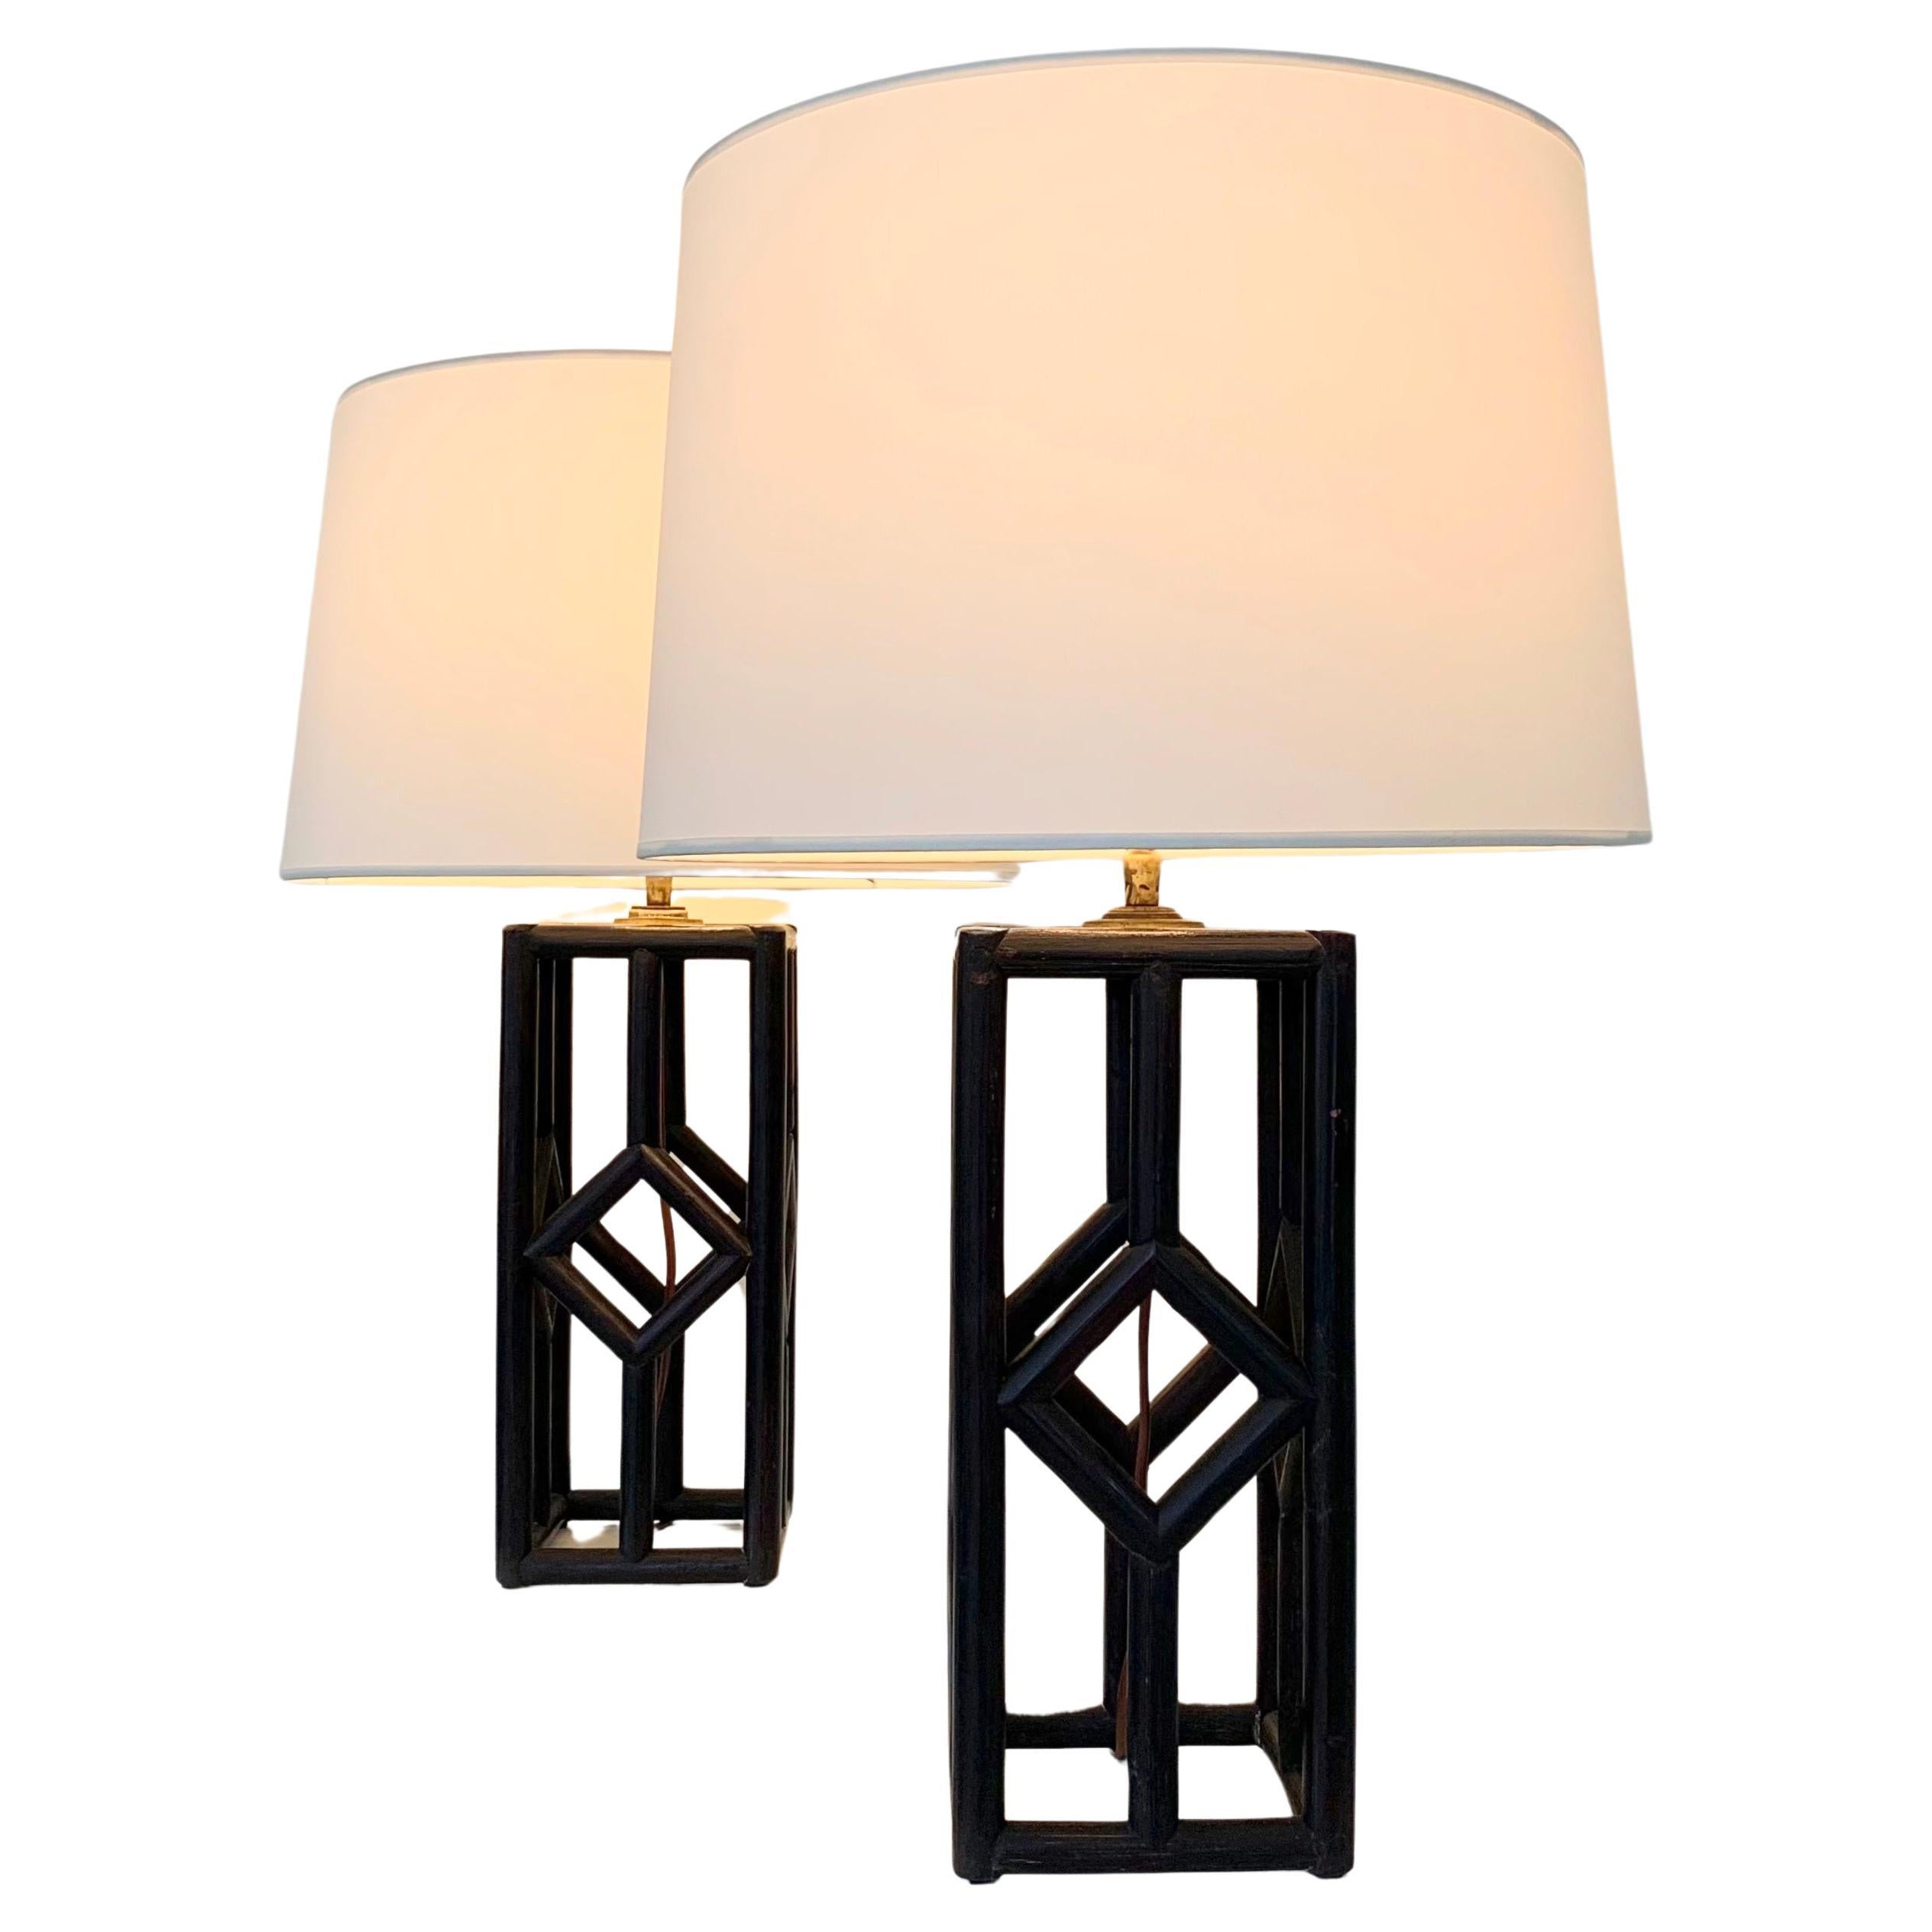 Mid-Century Pair of Bamboo Table Lamps, circa 1970, Italy.